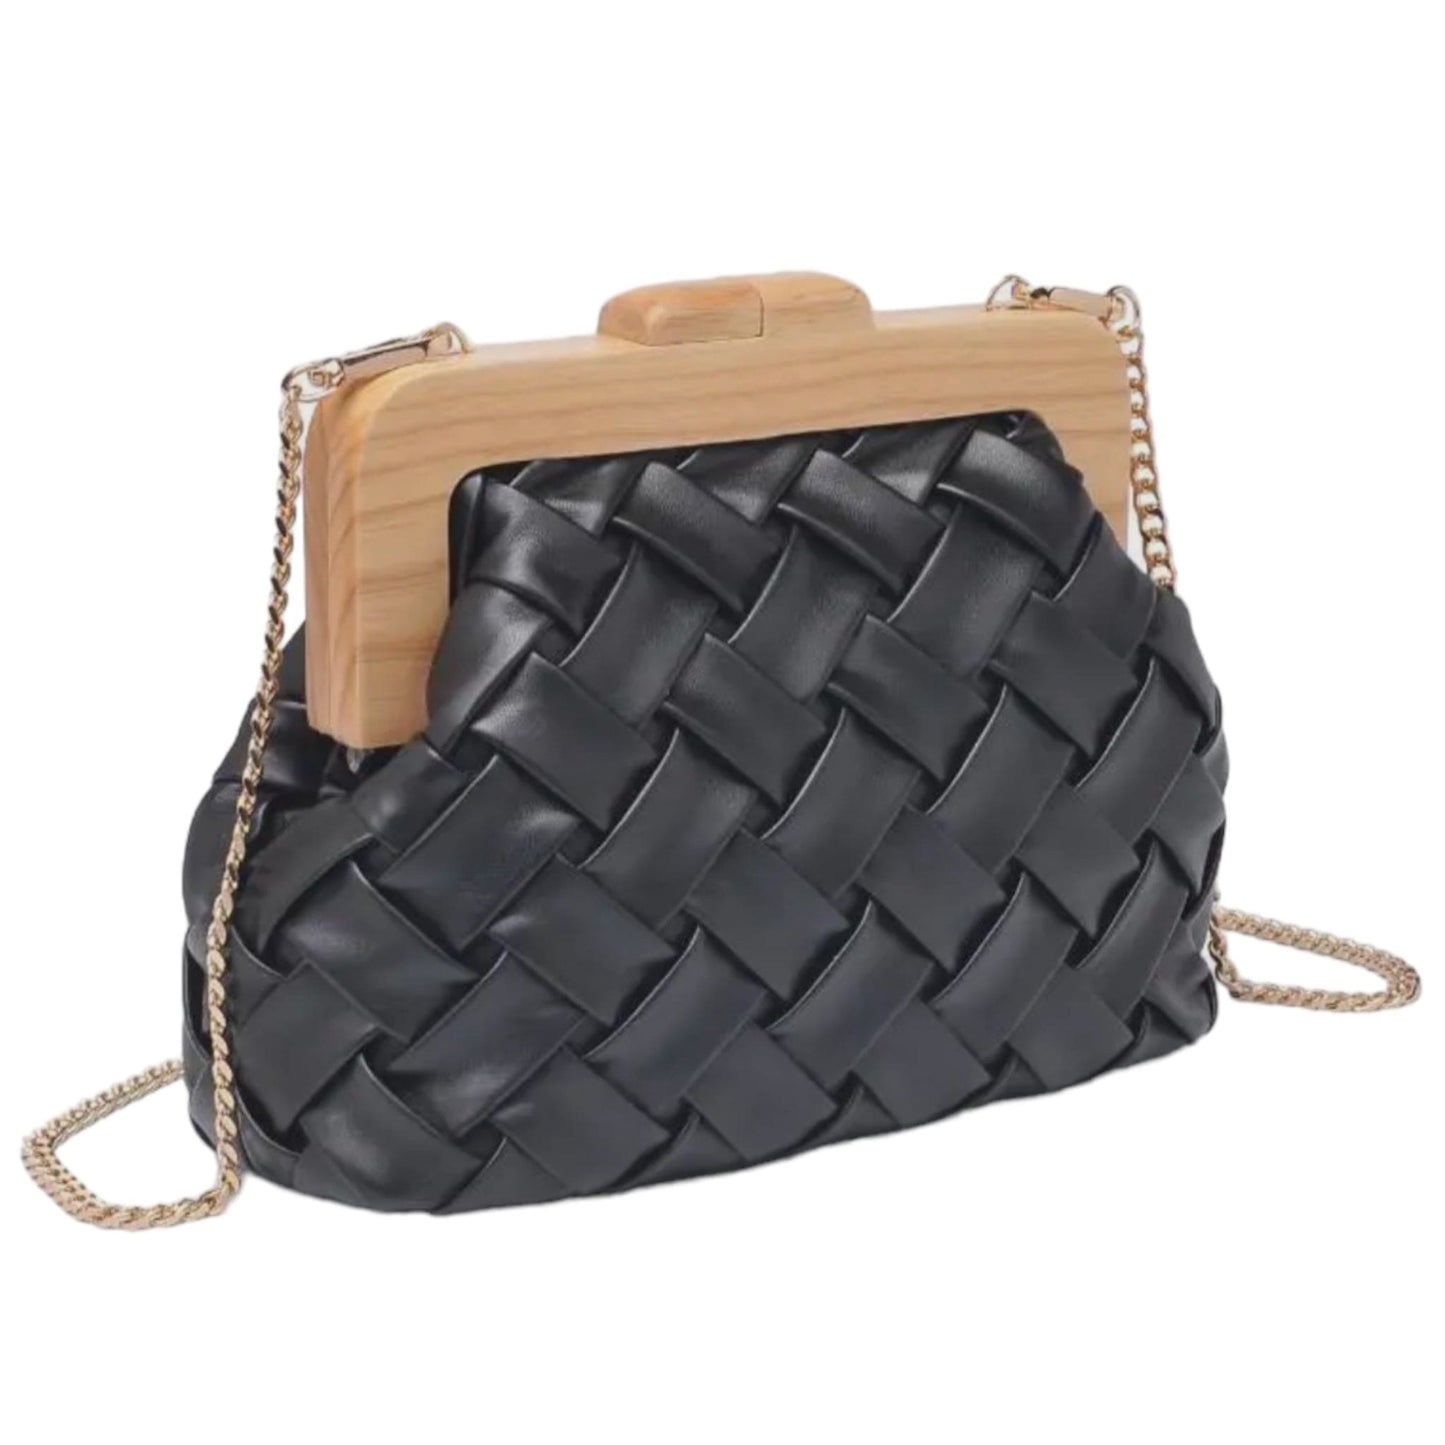 Chunky Black Woven Clutch with Wood Details